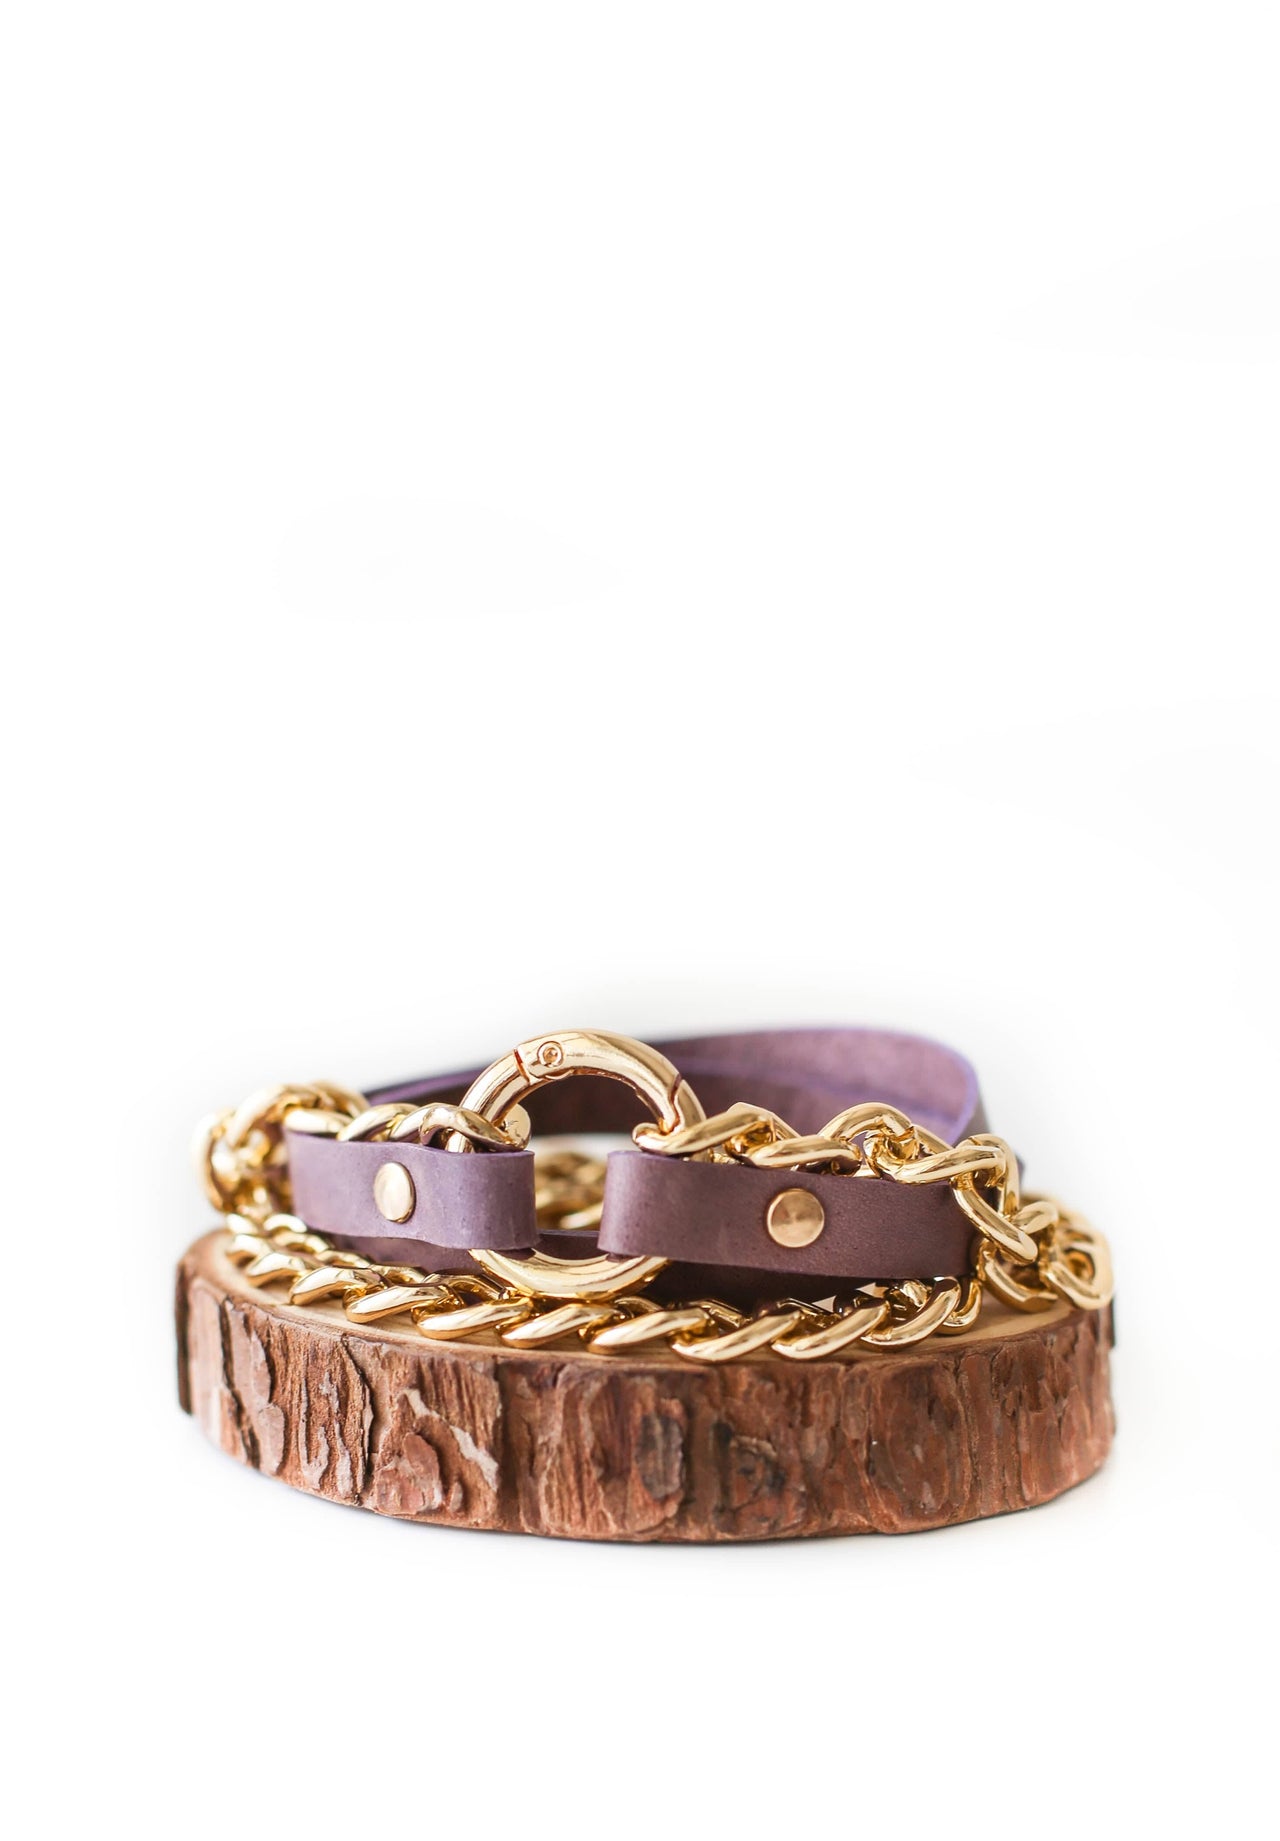 Small Ring Purple Leather Bracelet w/ Chain